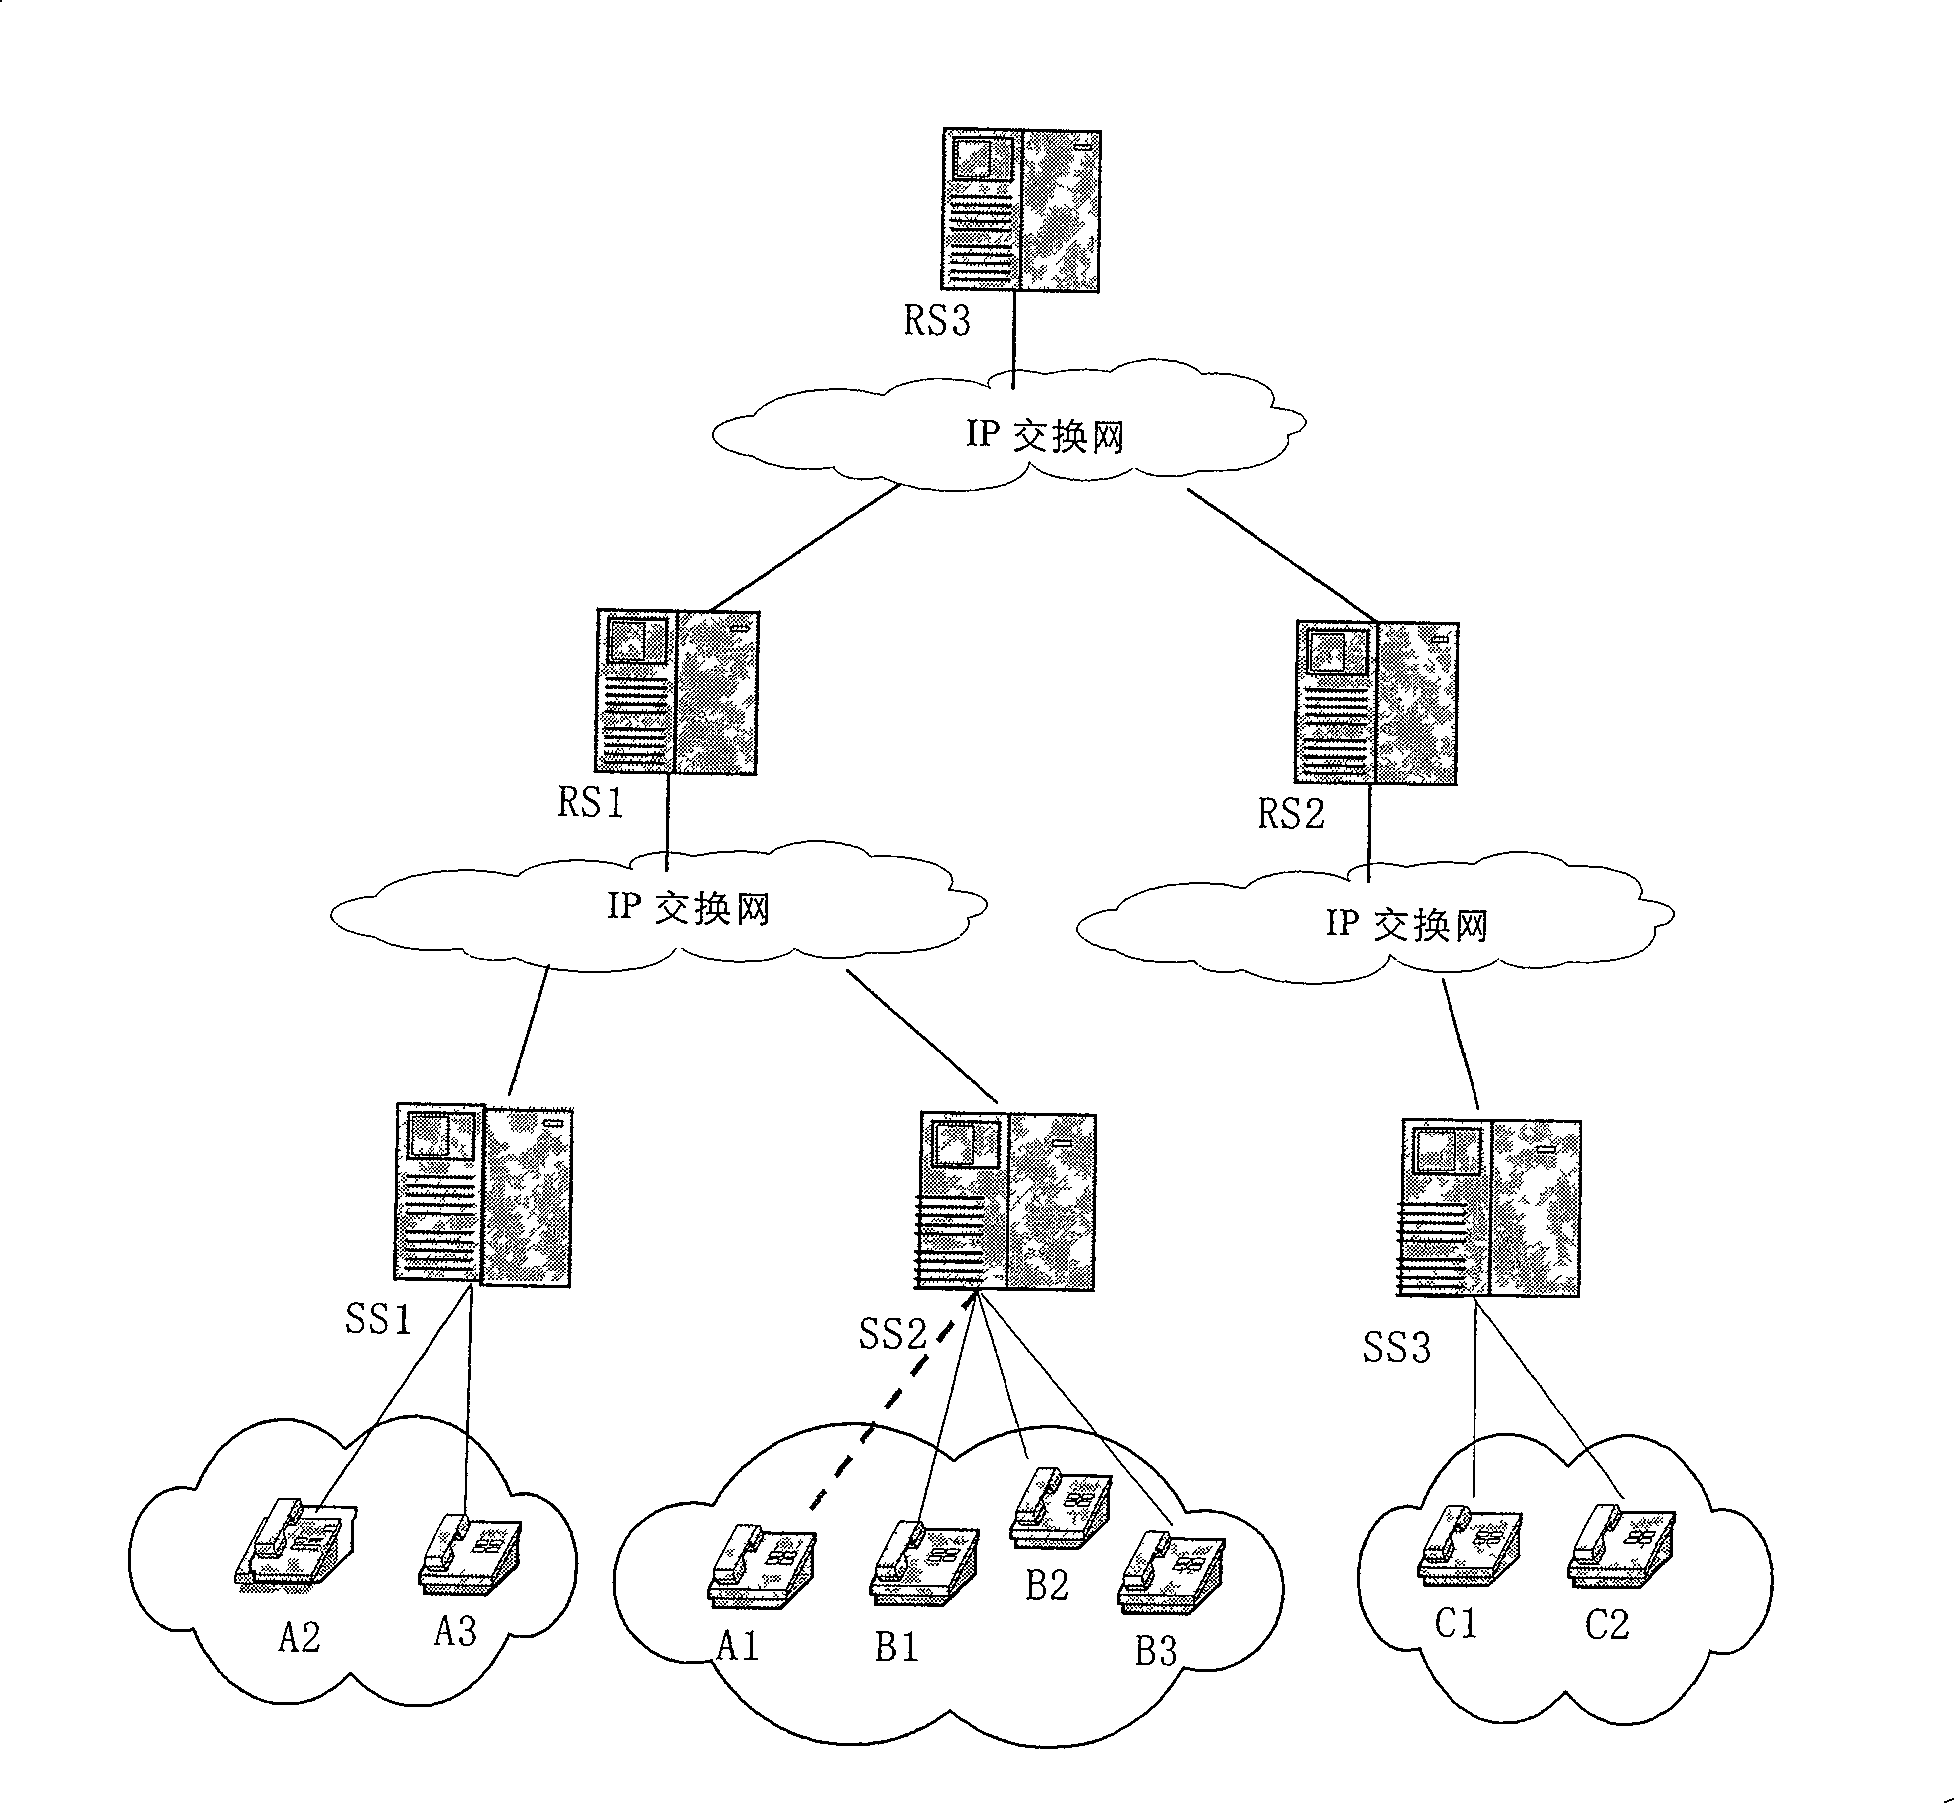 Method for realizing total network number carring business by route service device